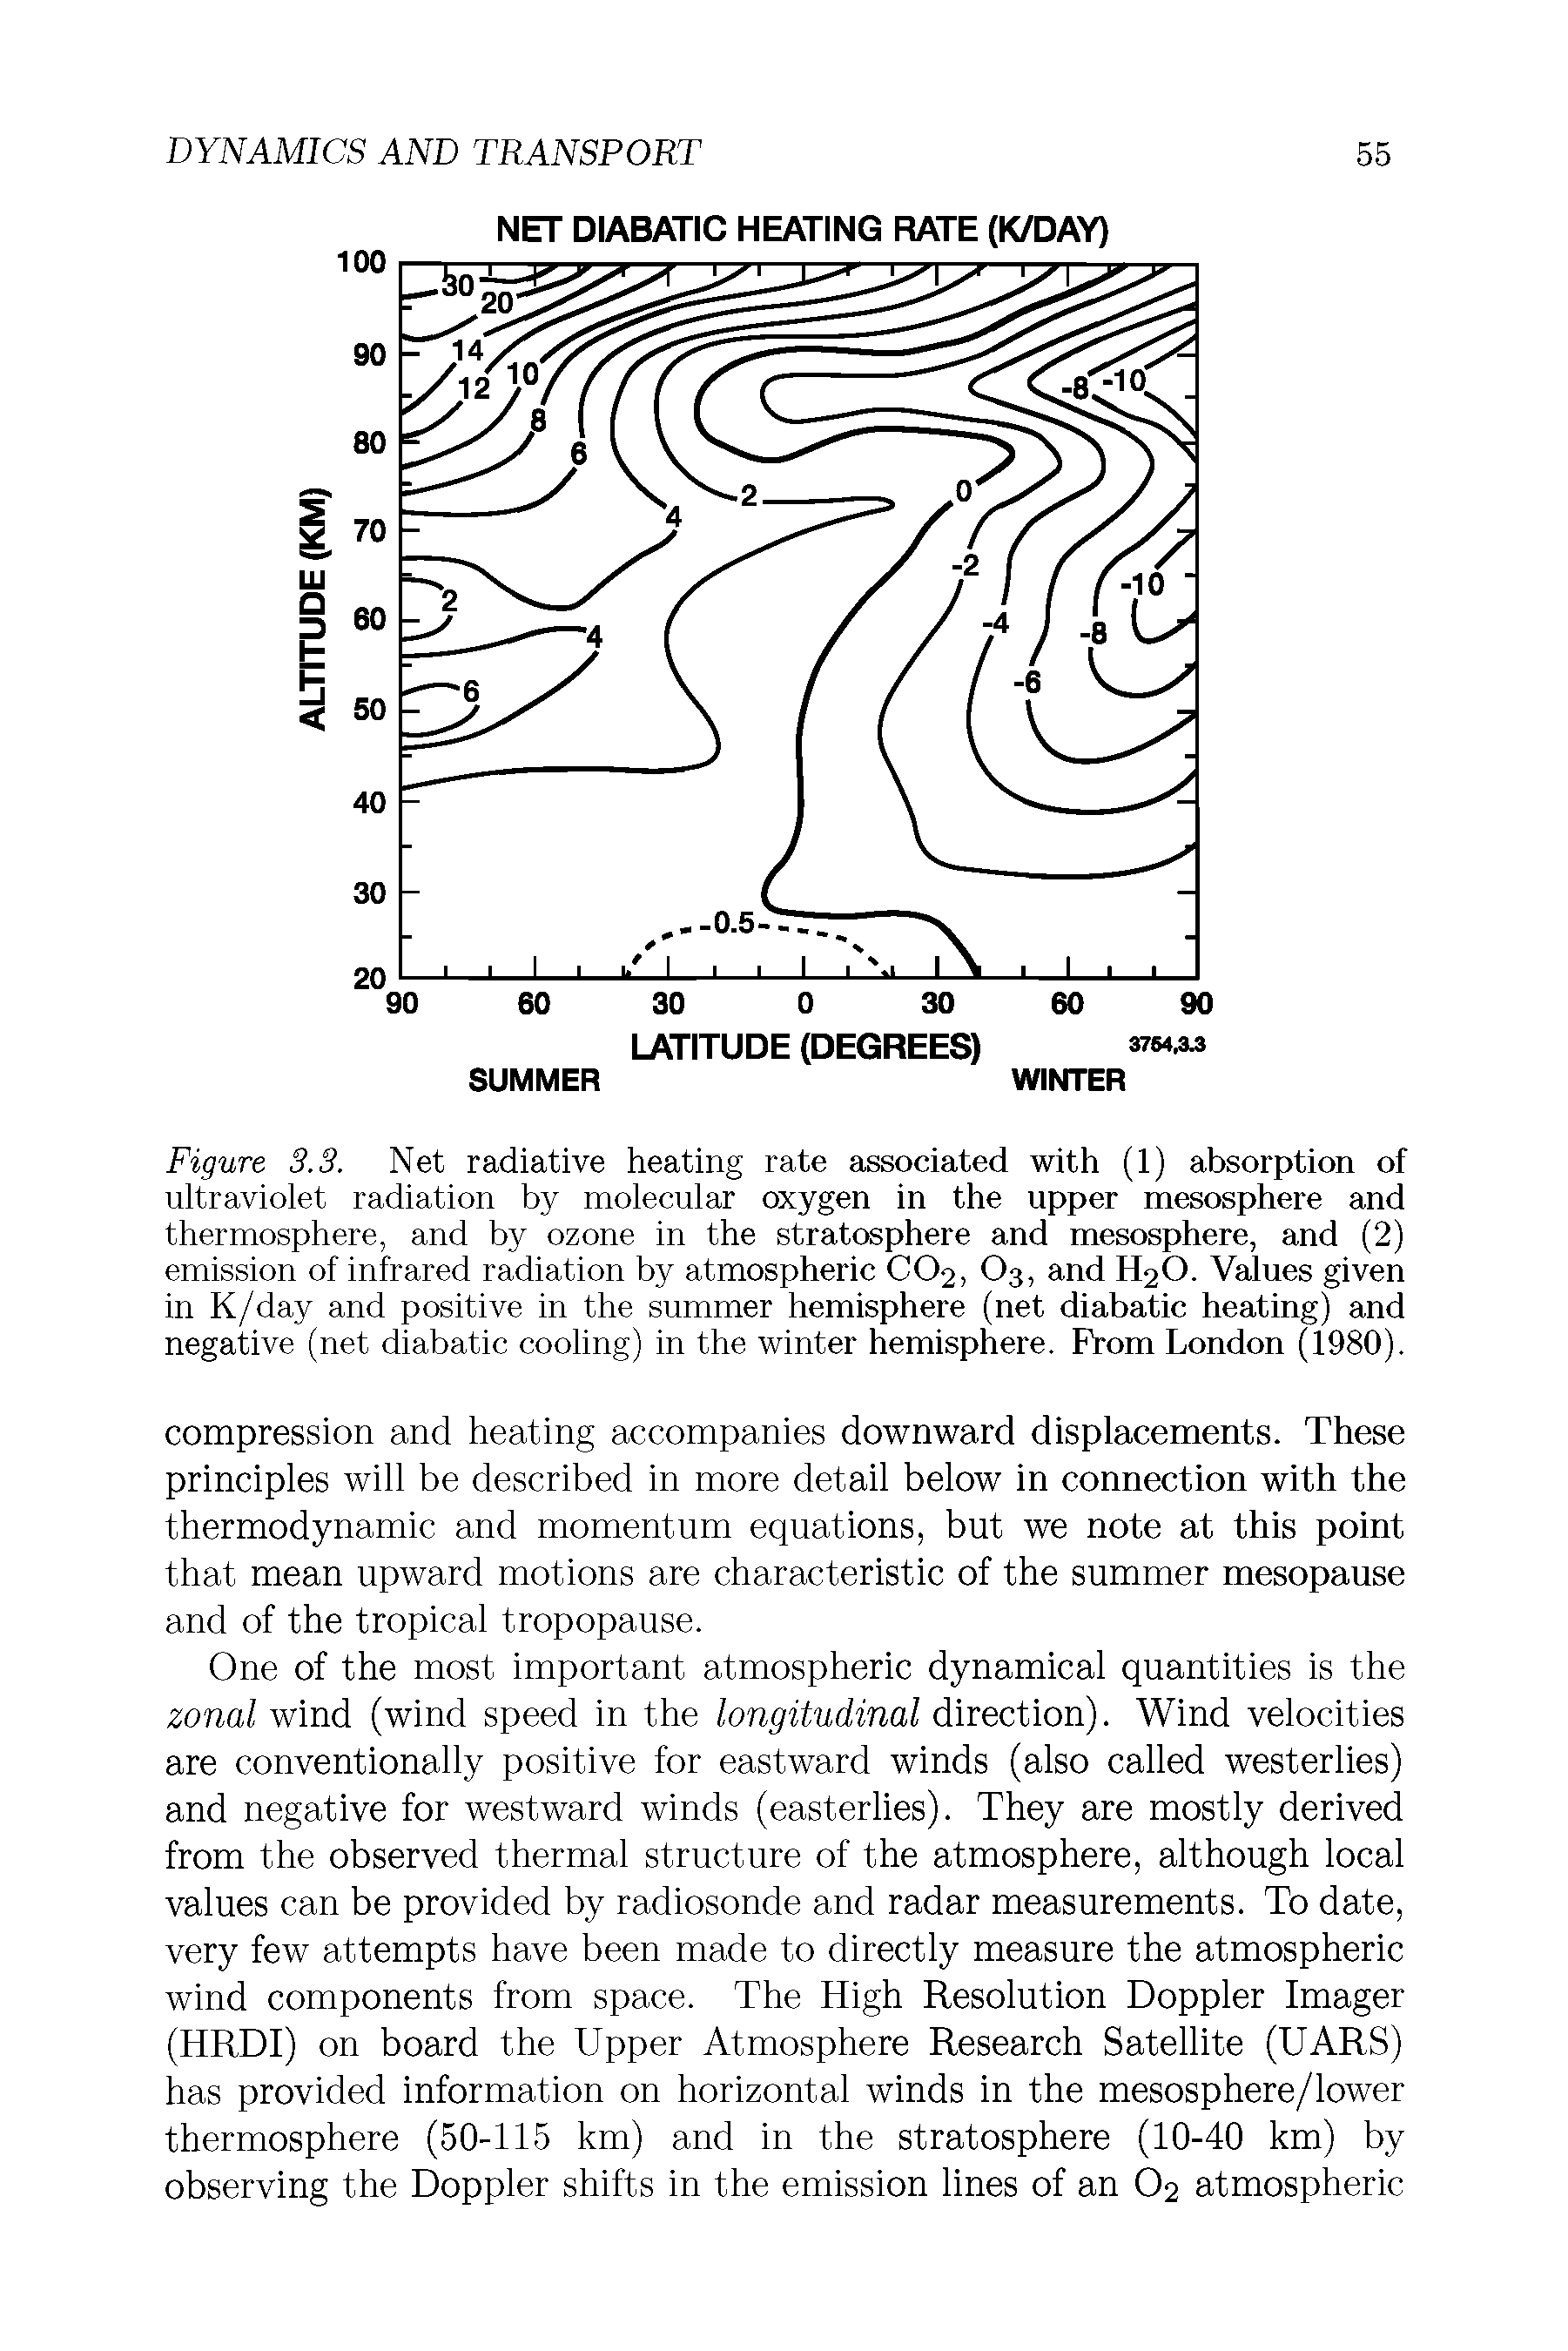 Figure 3.3. Net radiative heating rate associated with (1) absorption of ultraviolet radiation by molecular oxygen in the upper mesosphere and thermosphere, and by ozone in the stratosphere and mesosphere, and (2) emission of infrared radiation by atmospheric CO2, O3, and H2O. Values given in K/day and positive in the summer hemisphere (net diabatic heating) and negative (net diabatic cooling) in the winter hemisphere. Prom London (1980).